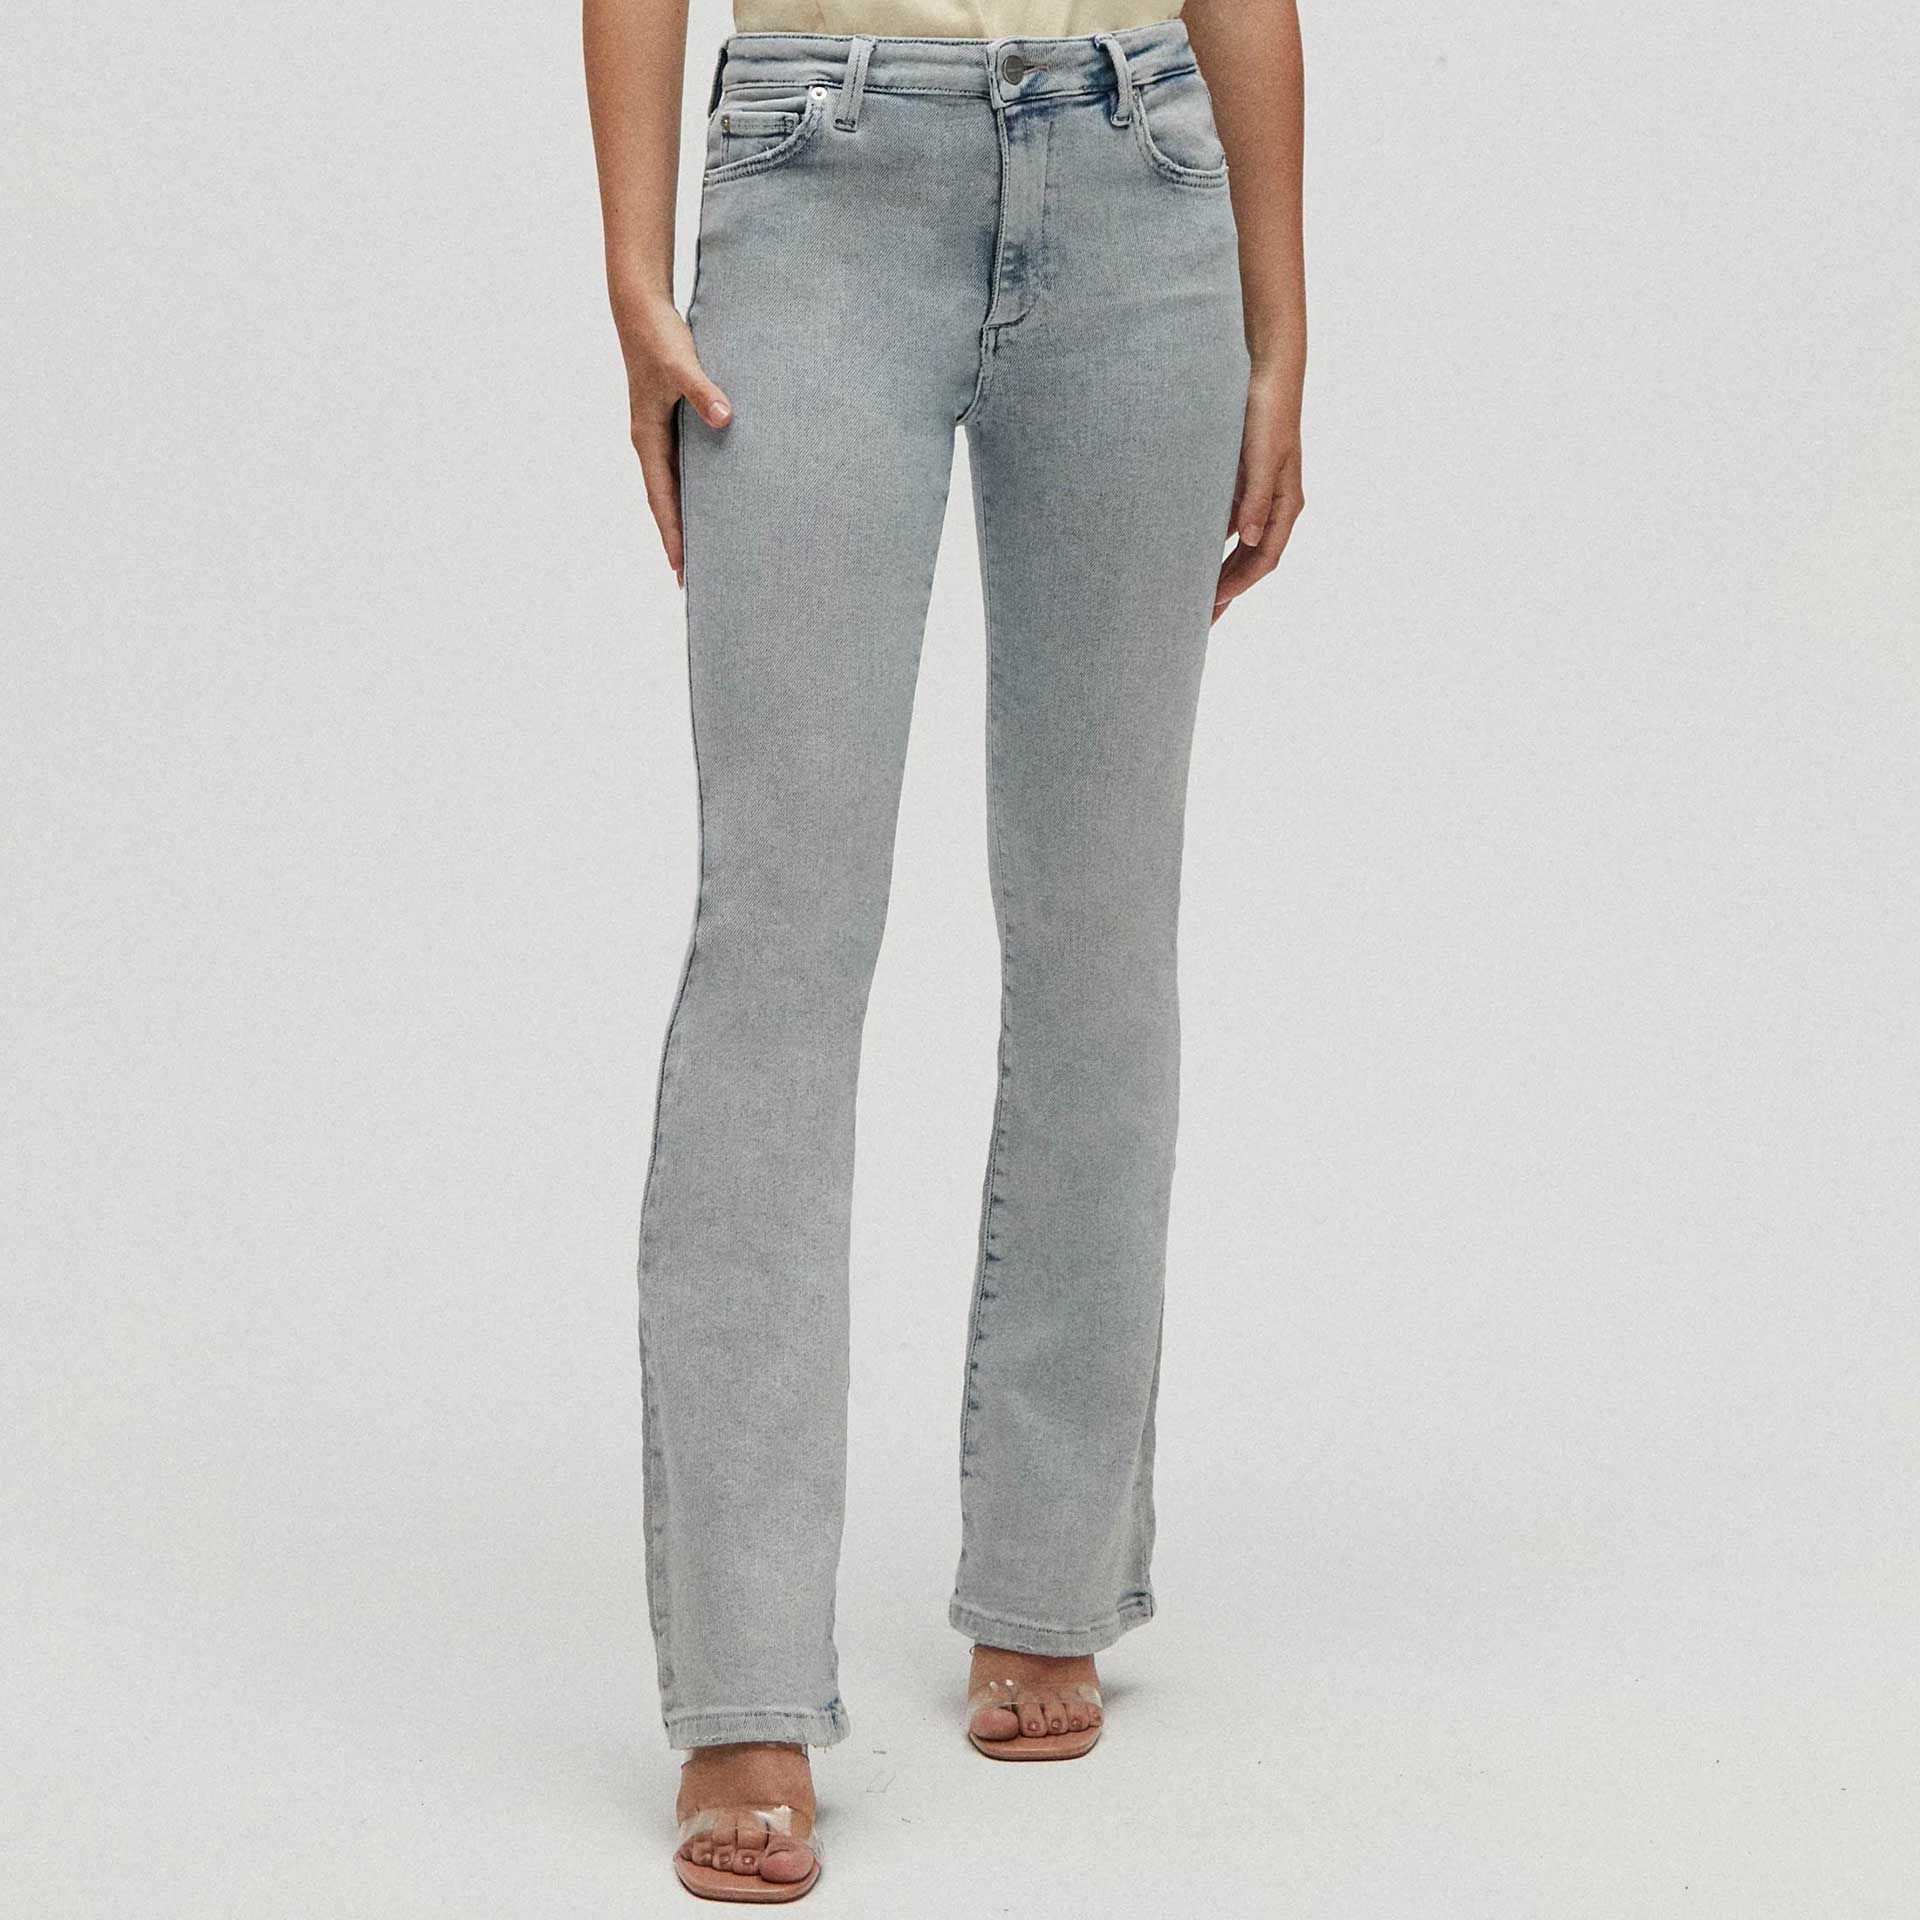 Homage Jeans Diana